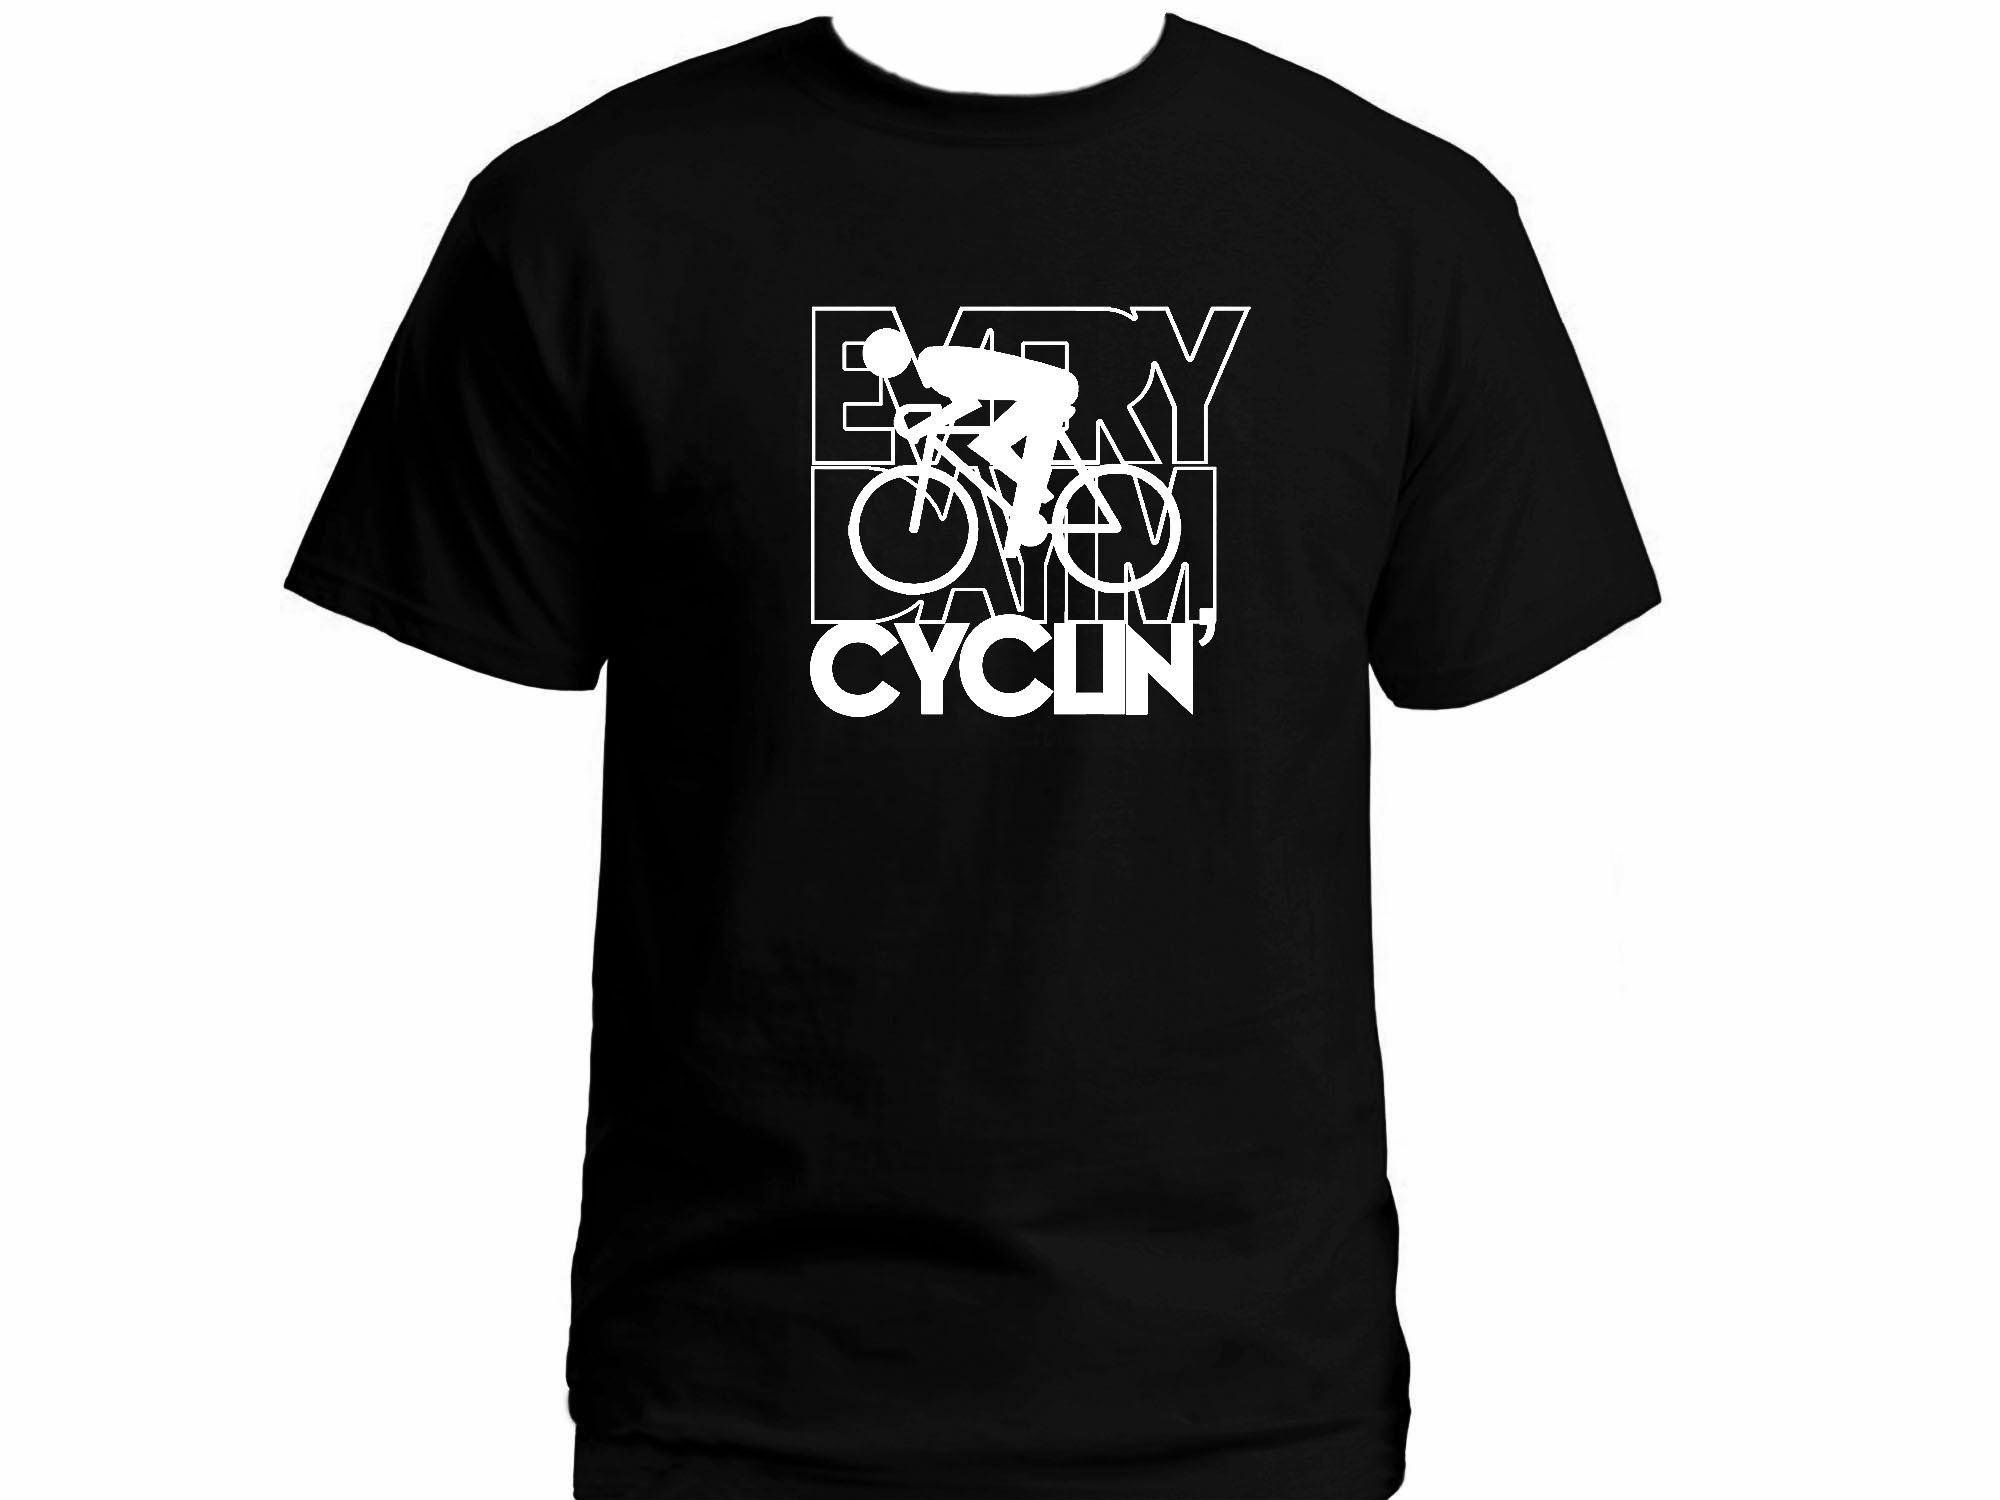 Everyday I'm cycling funny parody נicycle t-shirt